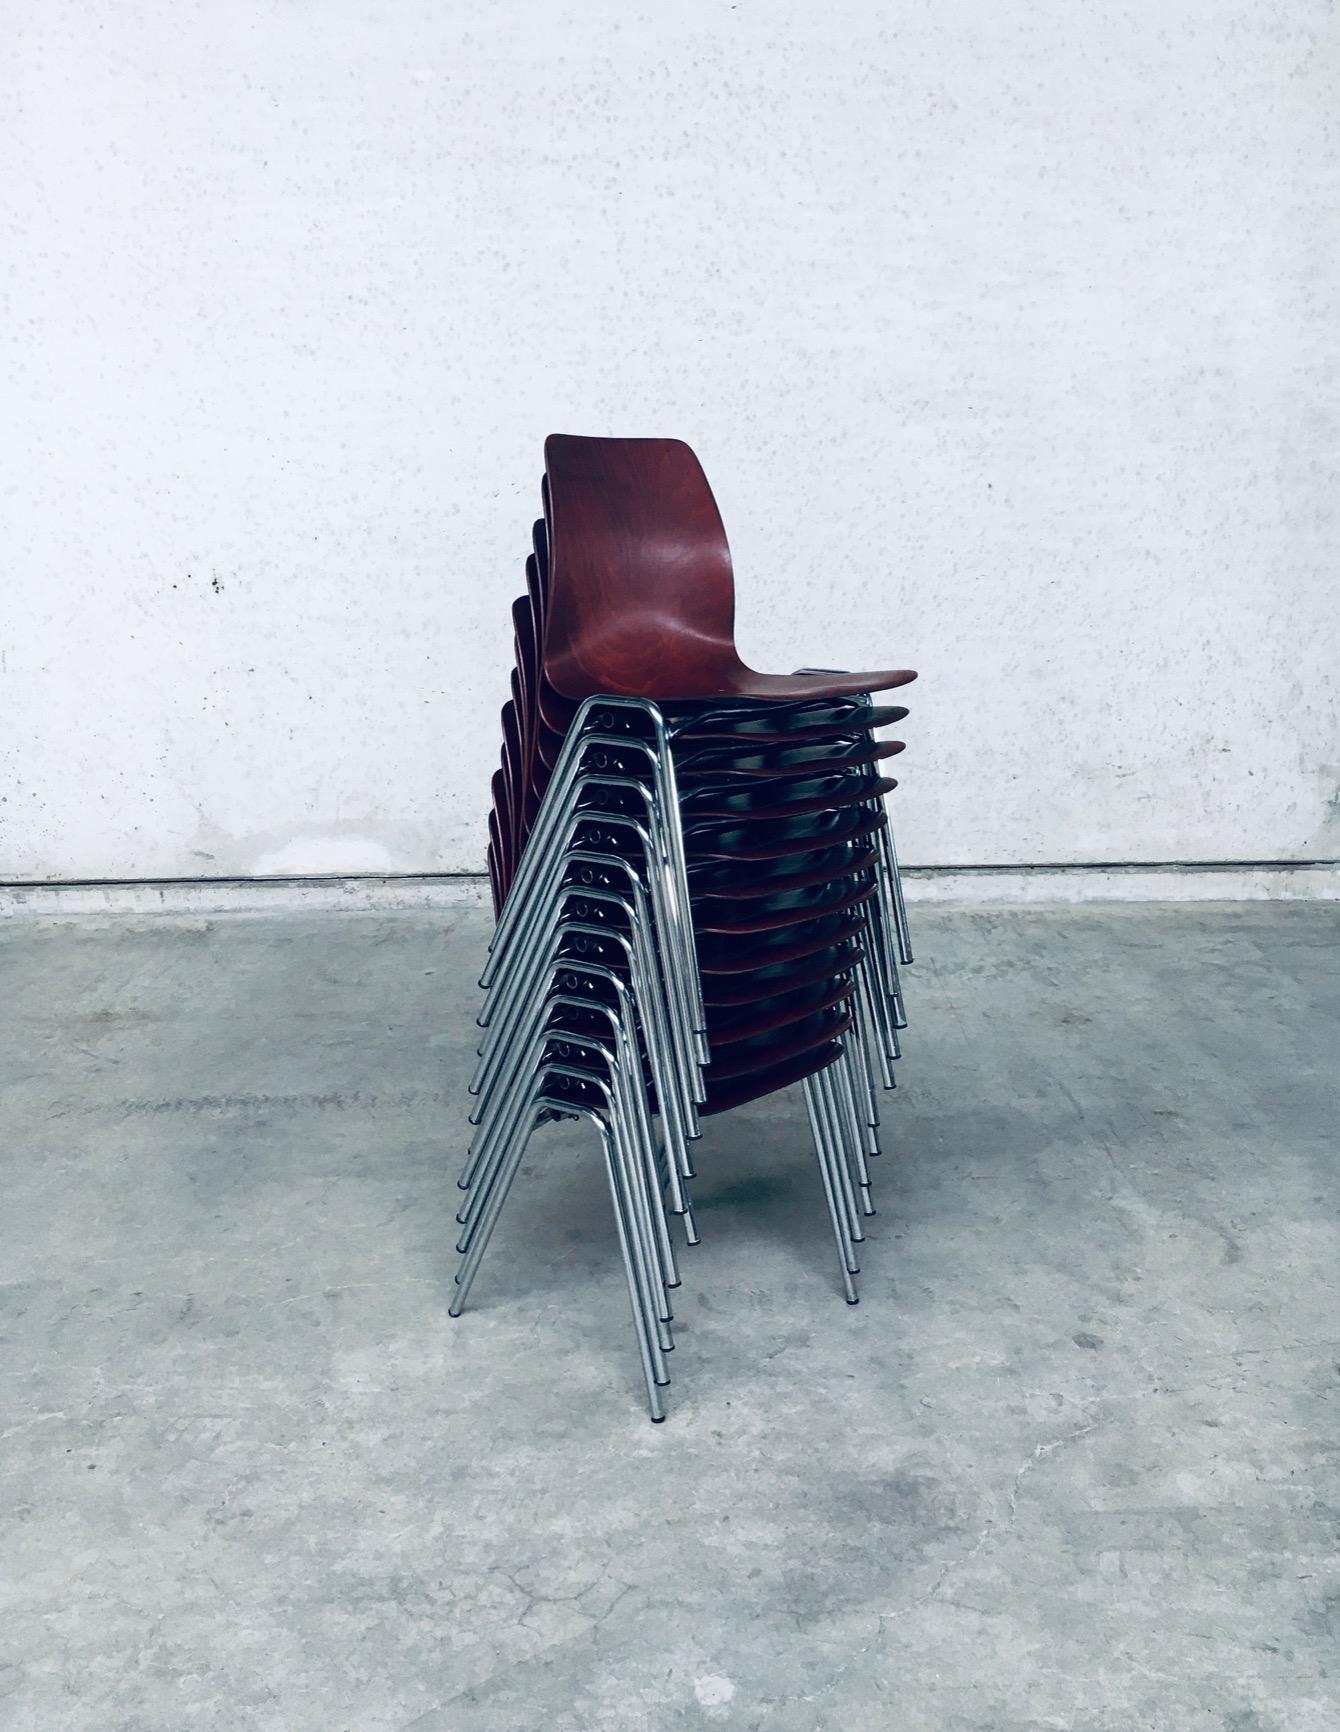 Midcentury Design Stacking Chairs by Elmar Flötotto for Pagholz, 1960's Germany For Sale 13